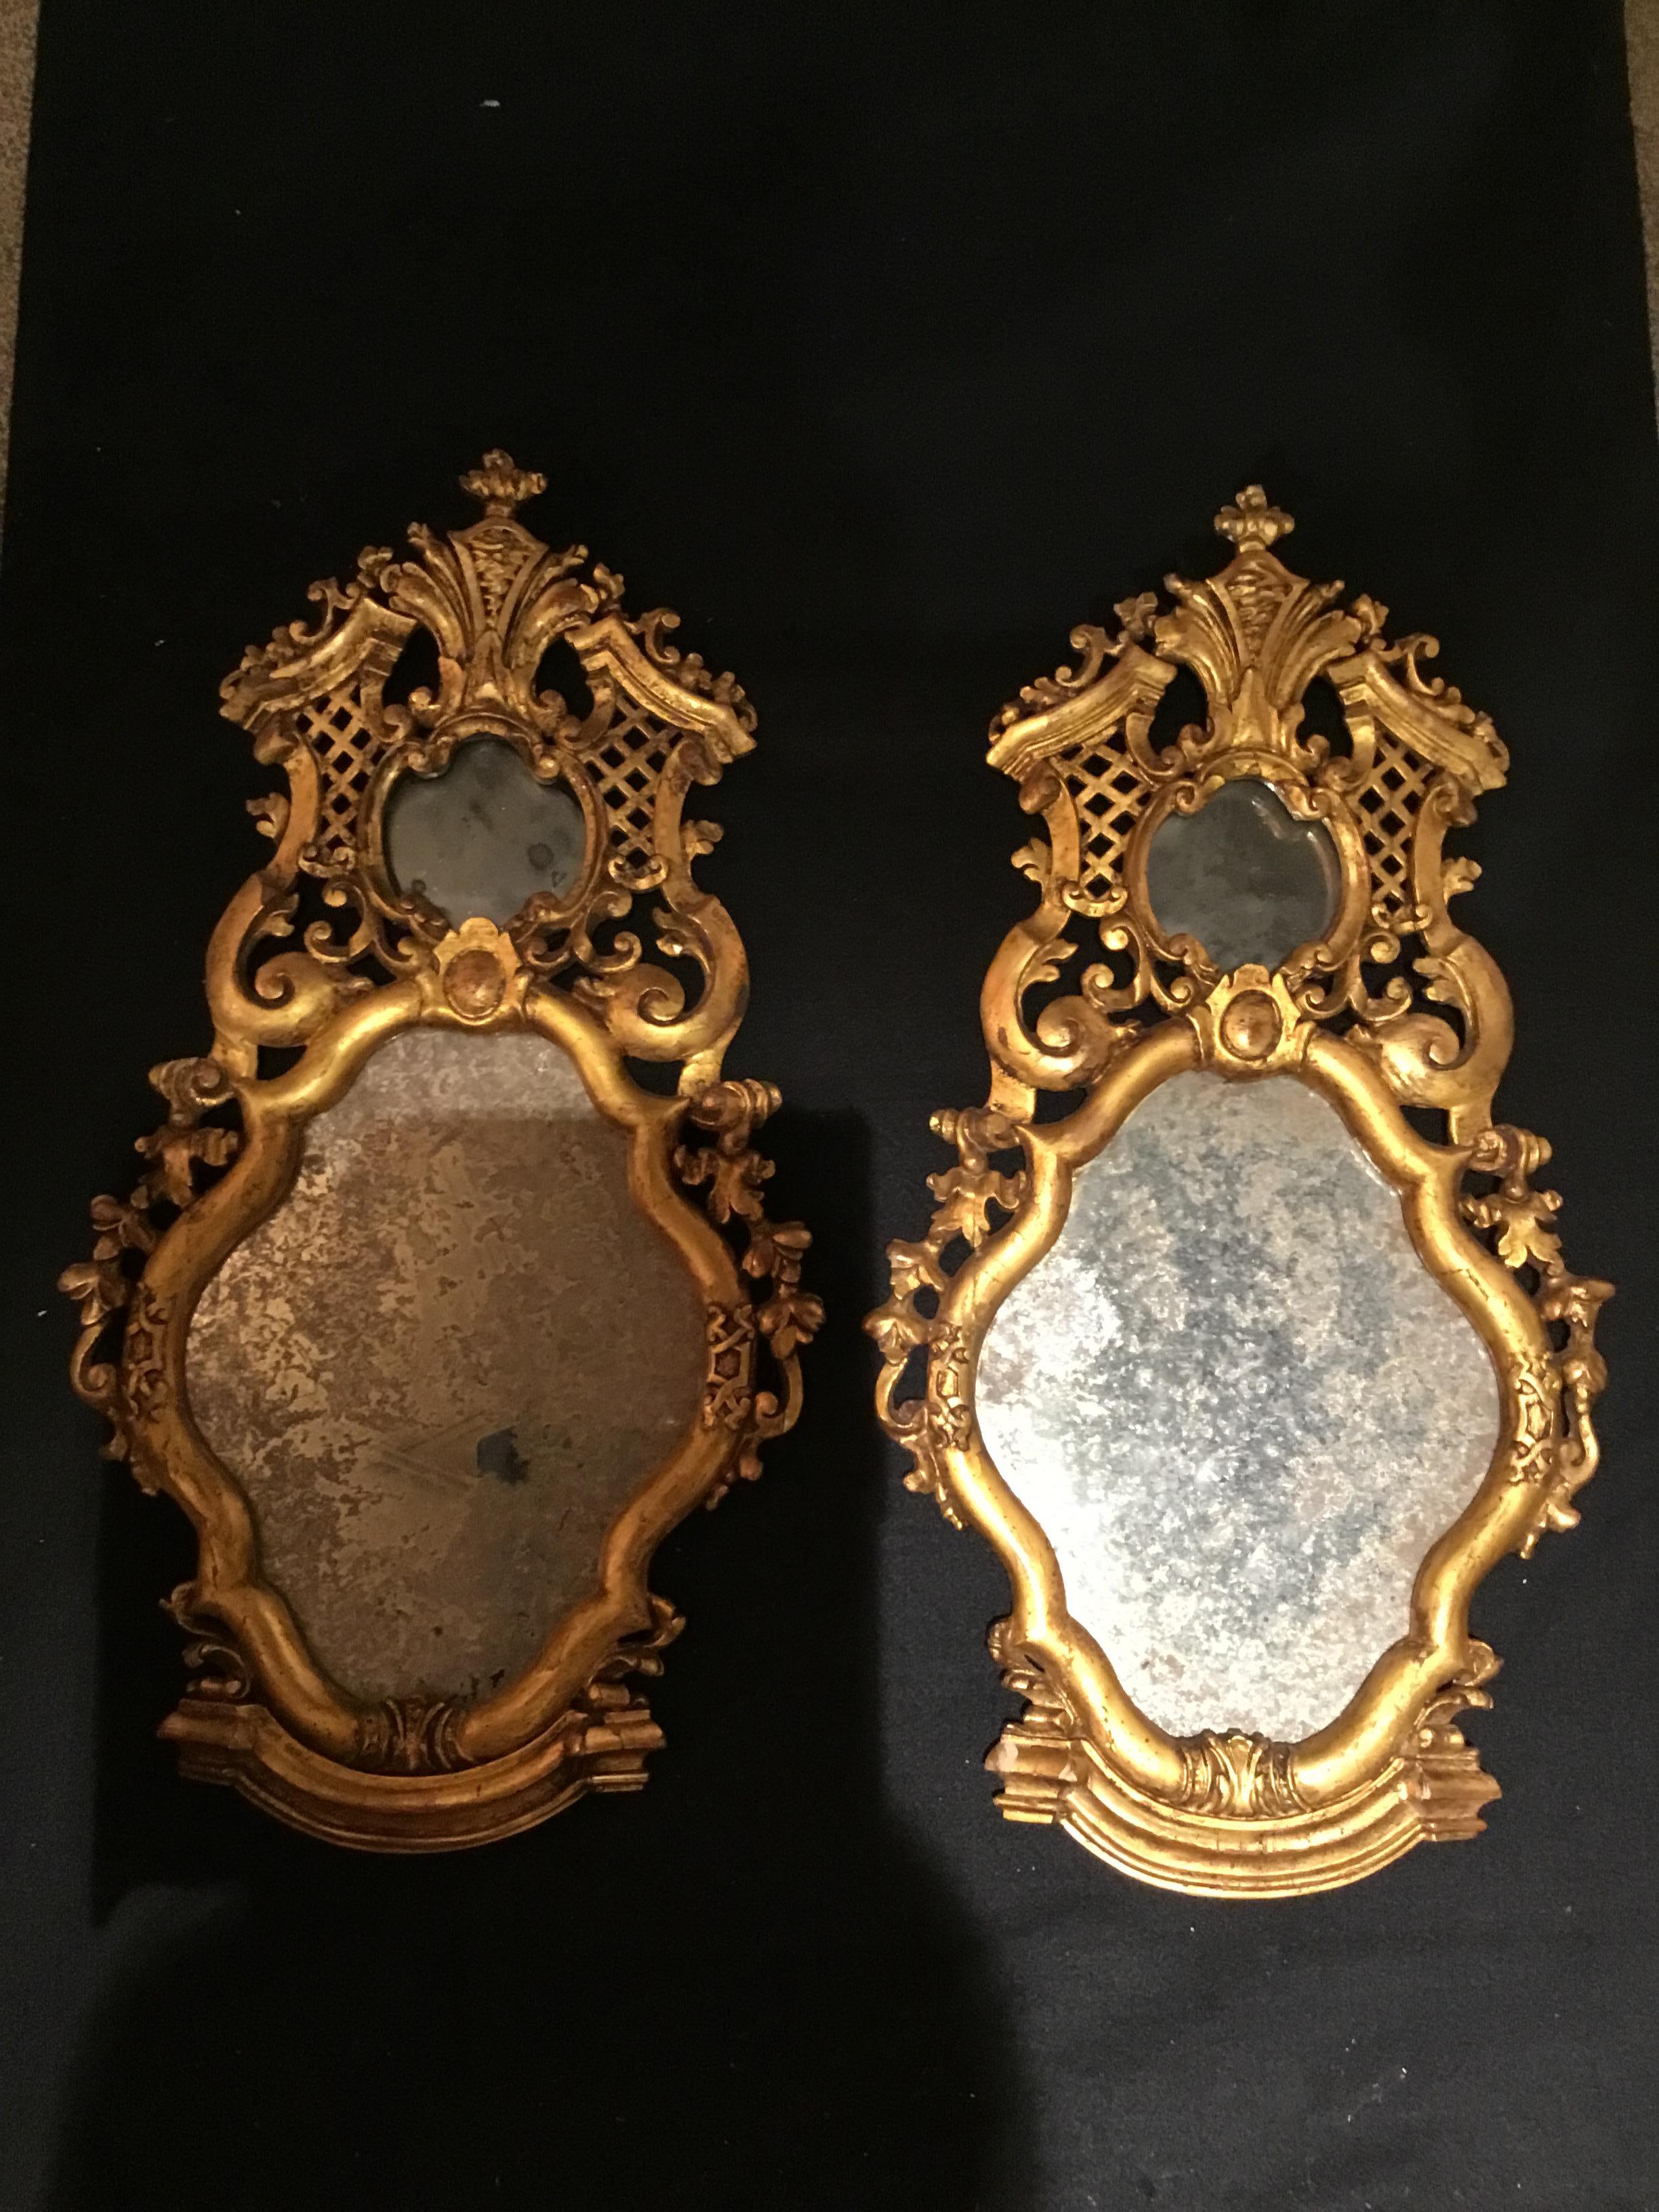 Beaux Arts Pair of Mirrored and Carved Giltwood Sconces, French, 19th Century